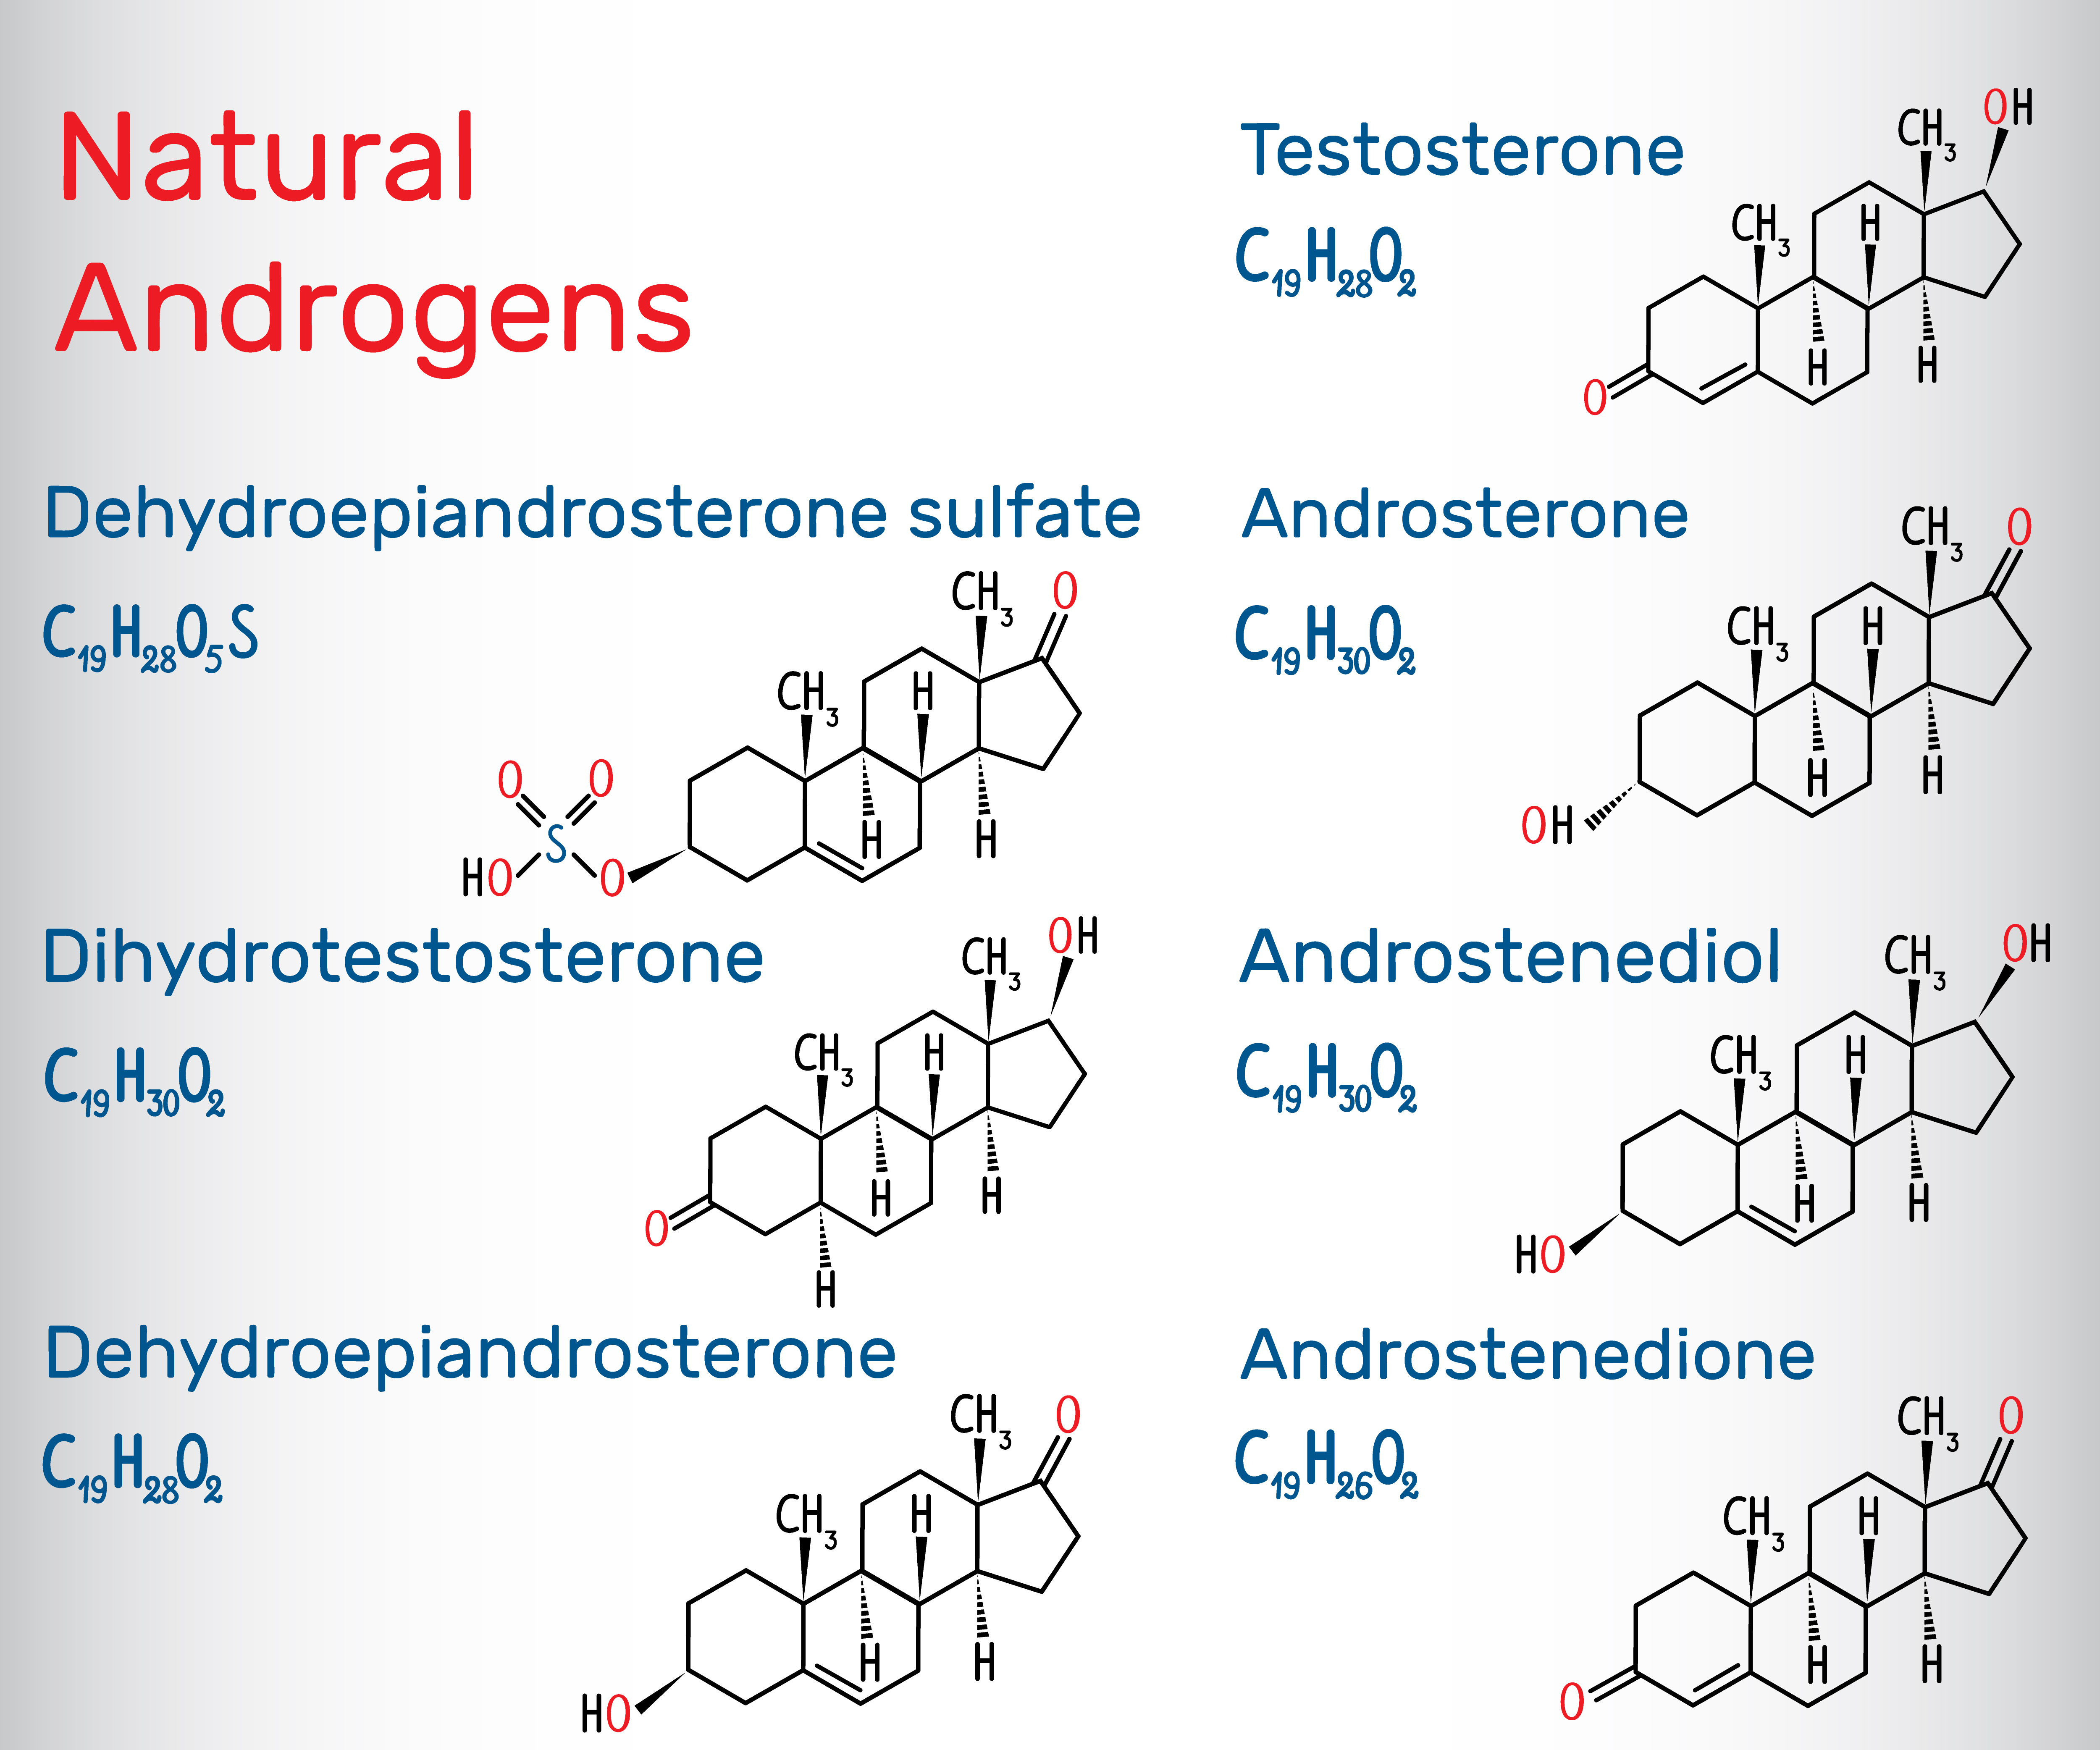 What are other androgens than testosterone?